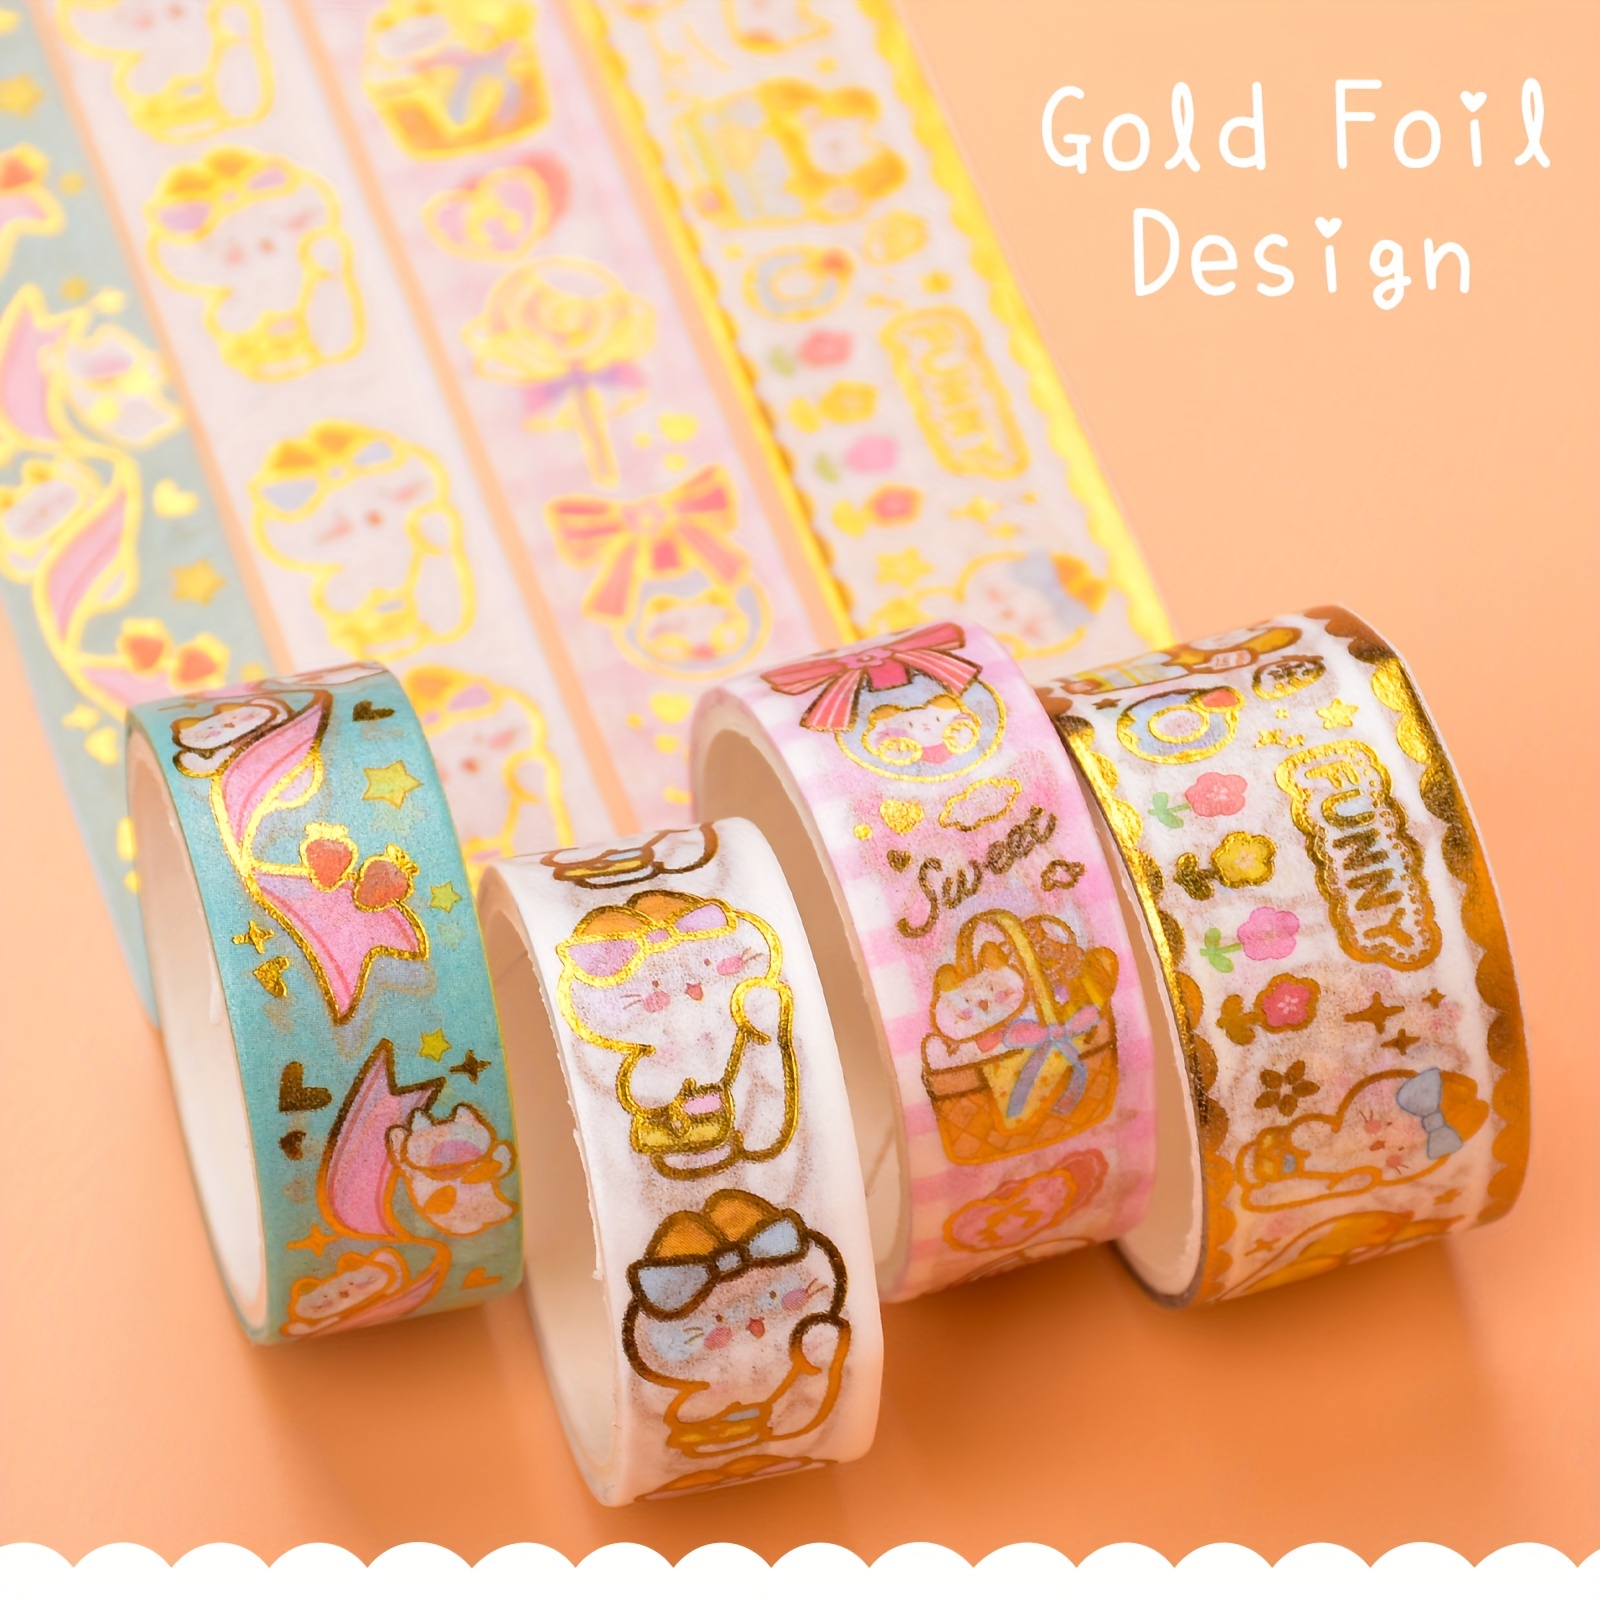 Washi Paper Tape, 18 Rolls Washi Tape Set, Decorative Adhesive Tape, Gold  Foil Flower Tape for Scrapbook,Washi Tape for Journaling,Scrapbooking